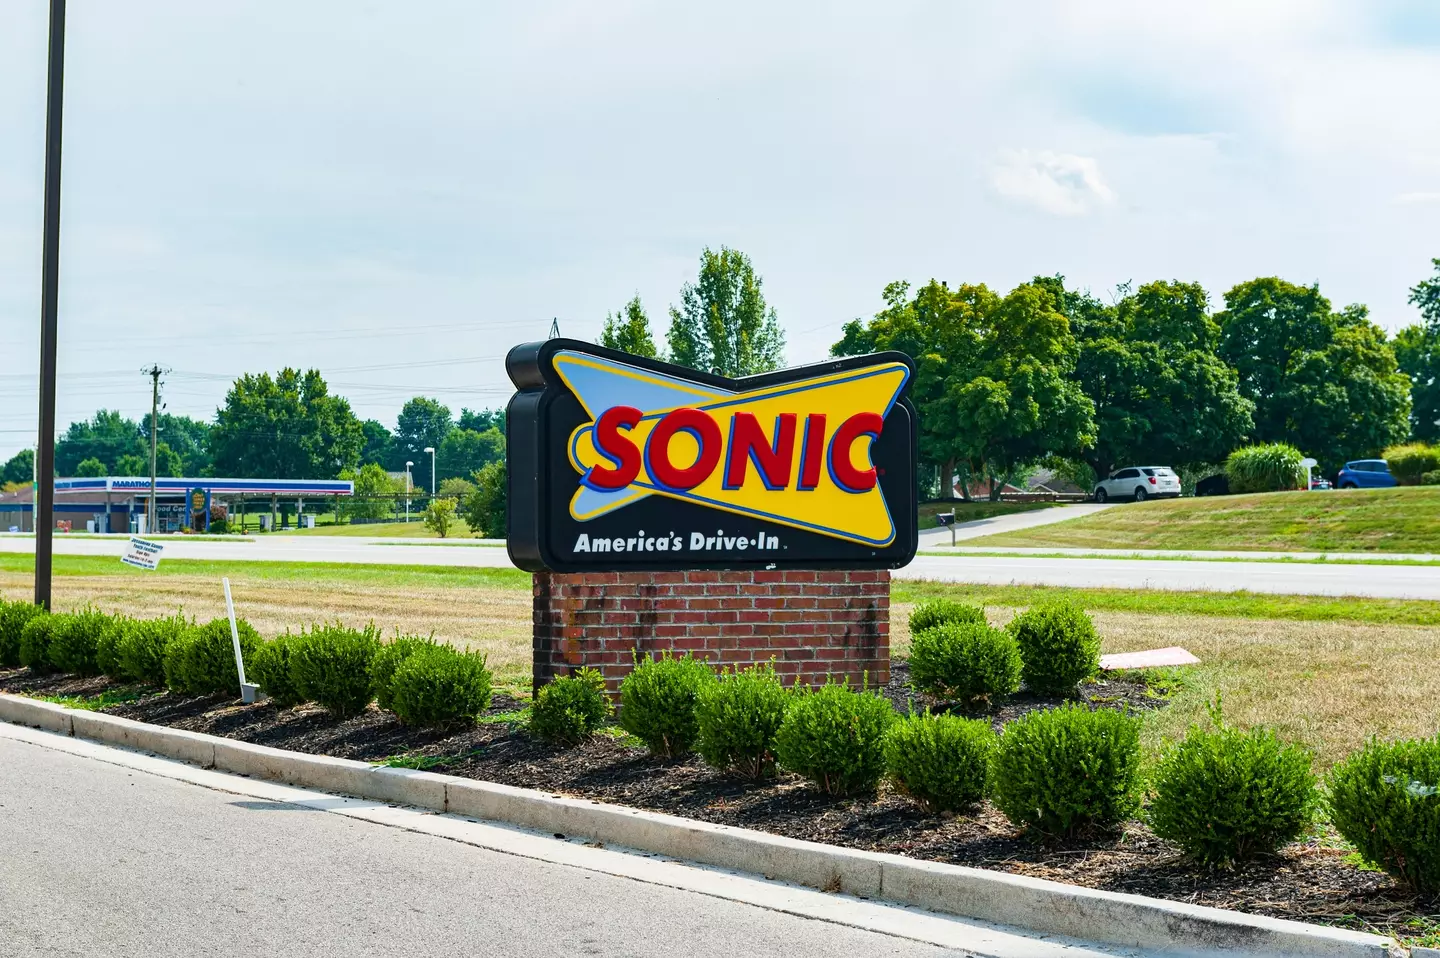 There are more than 3,500 Sonic Drive-In locations across the USA.